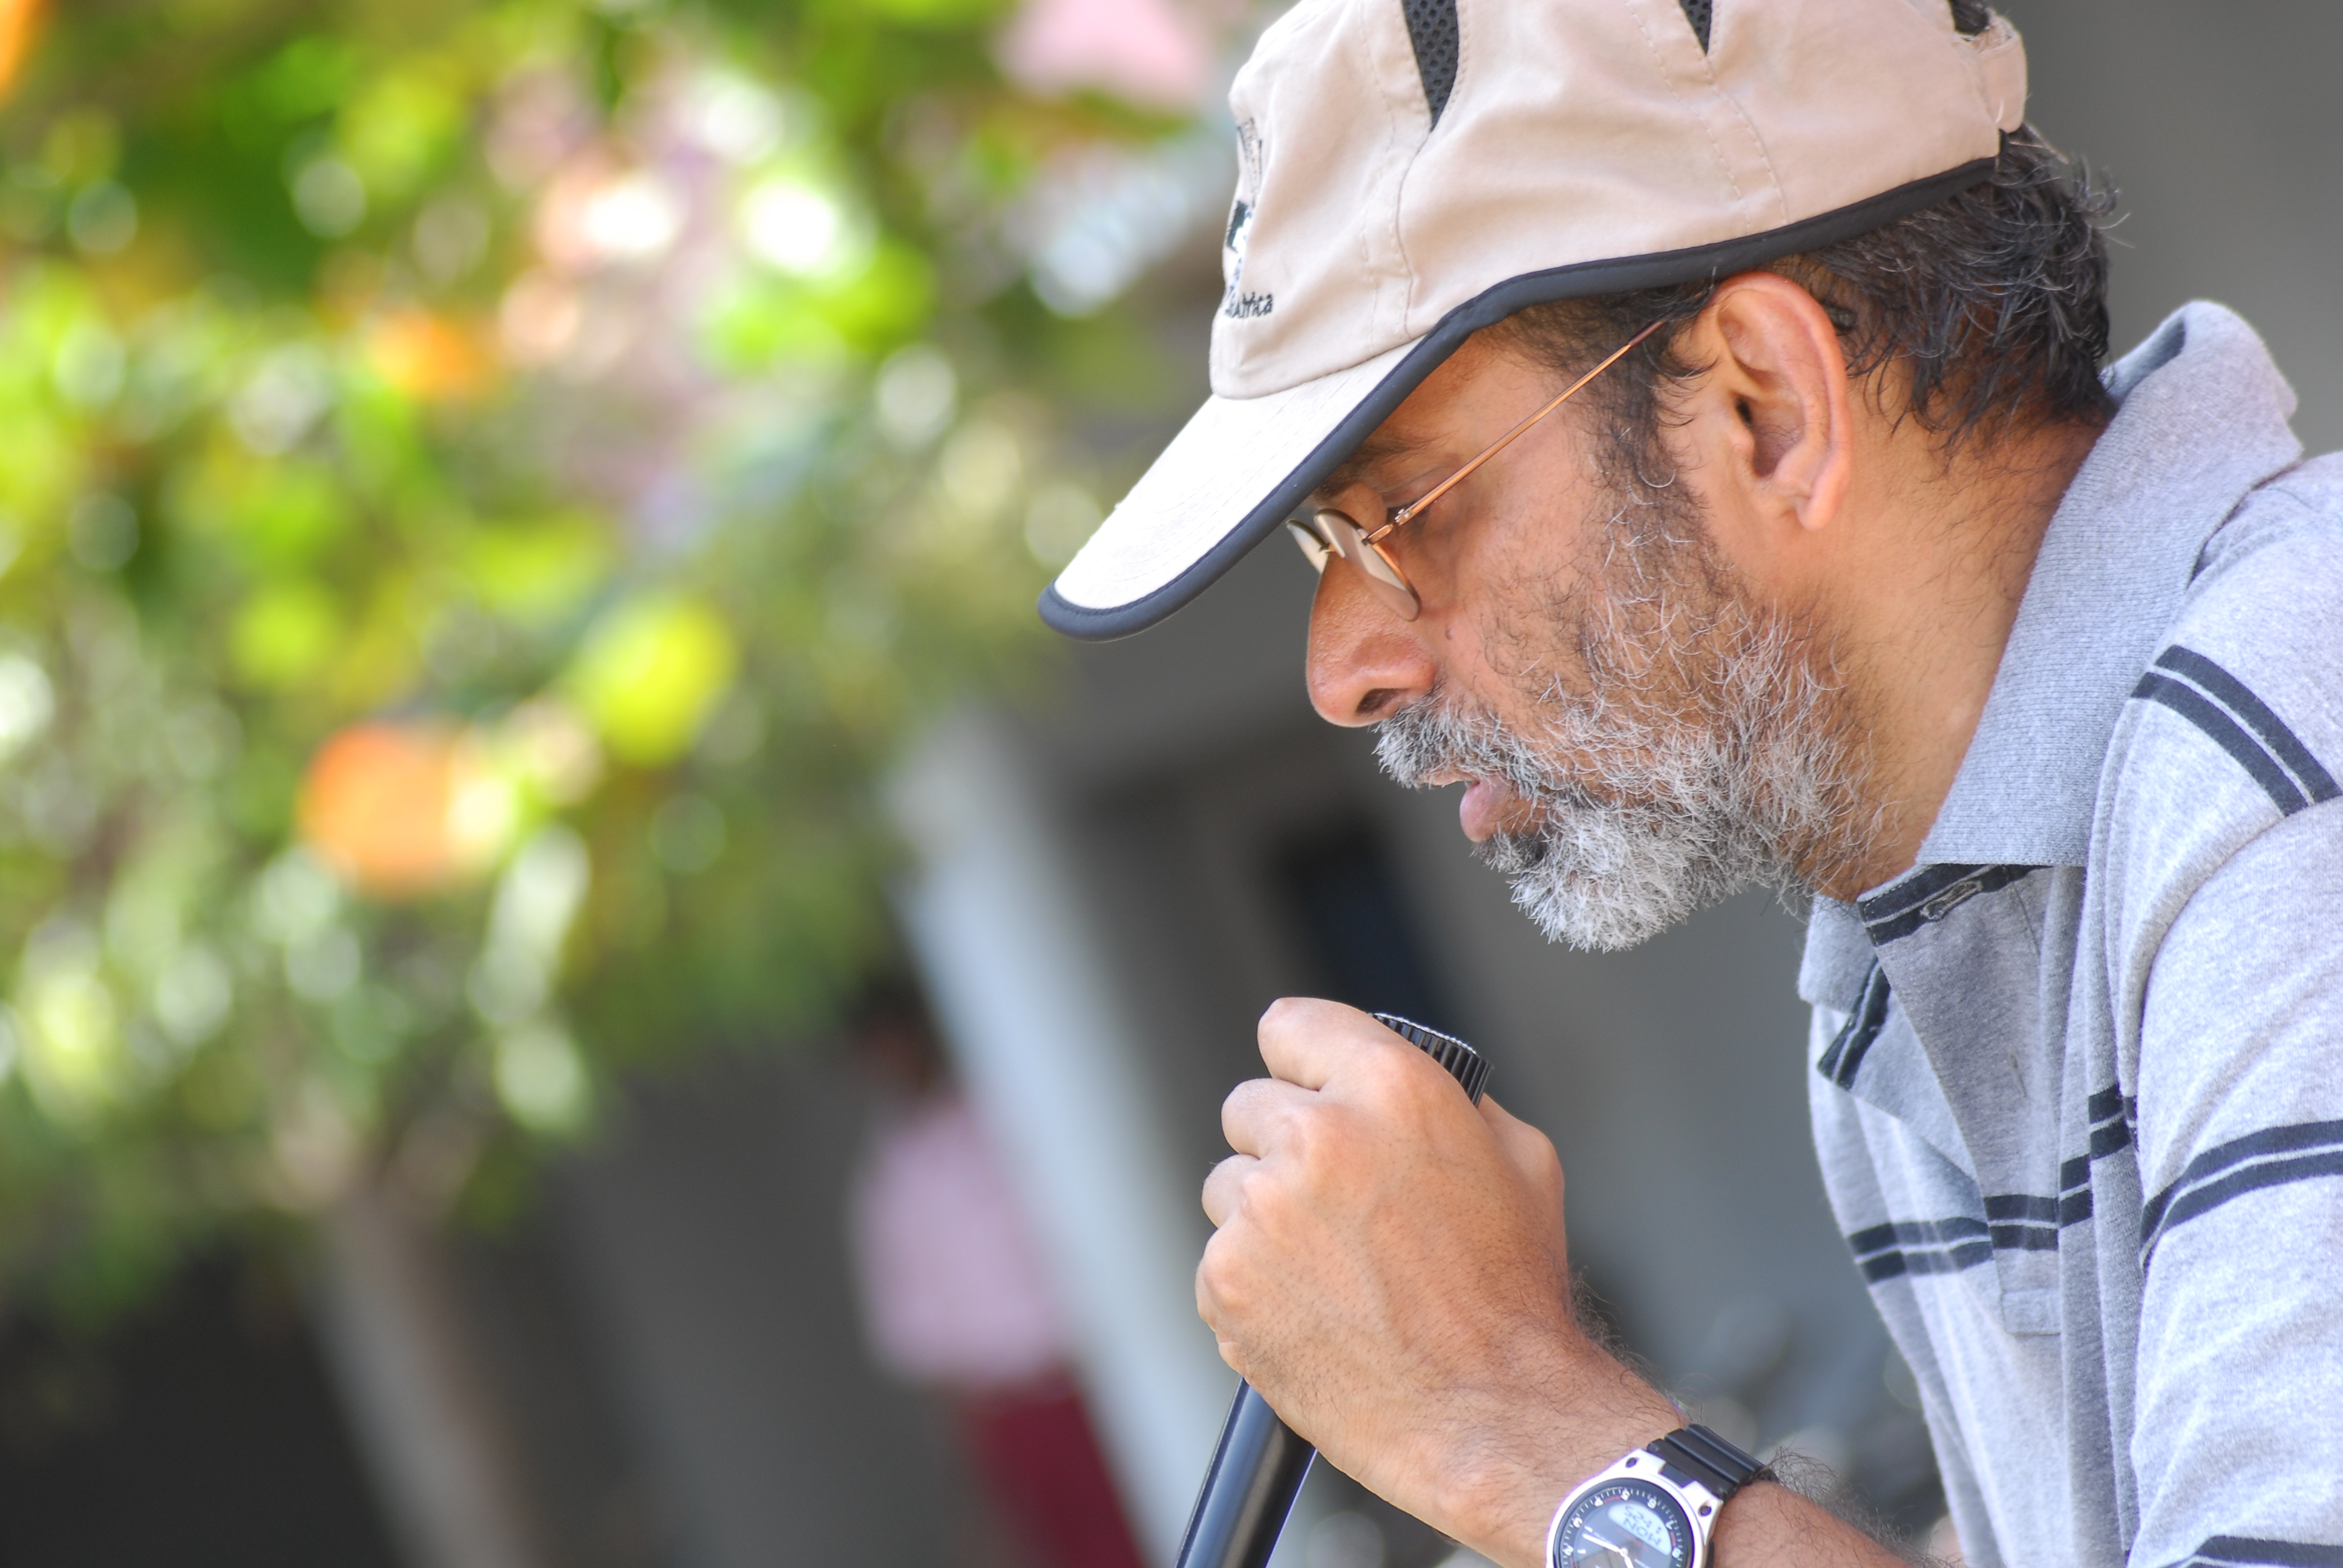 MADHU MAHANKALI, On location filming the feature film PARAMPARA